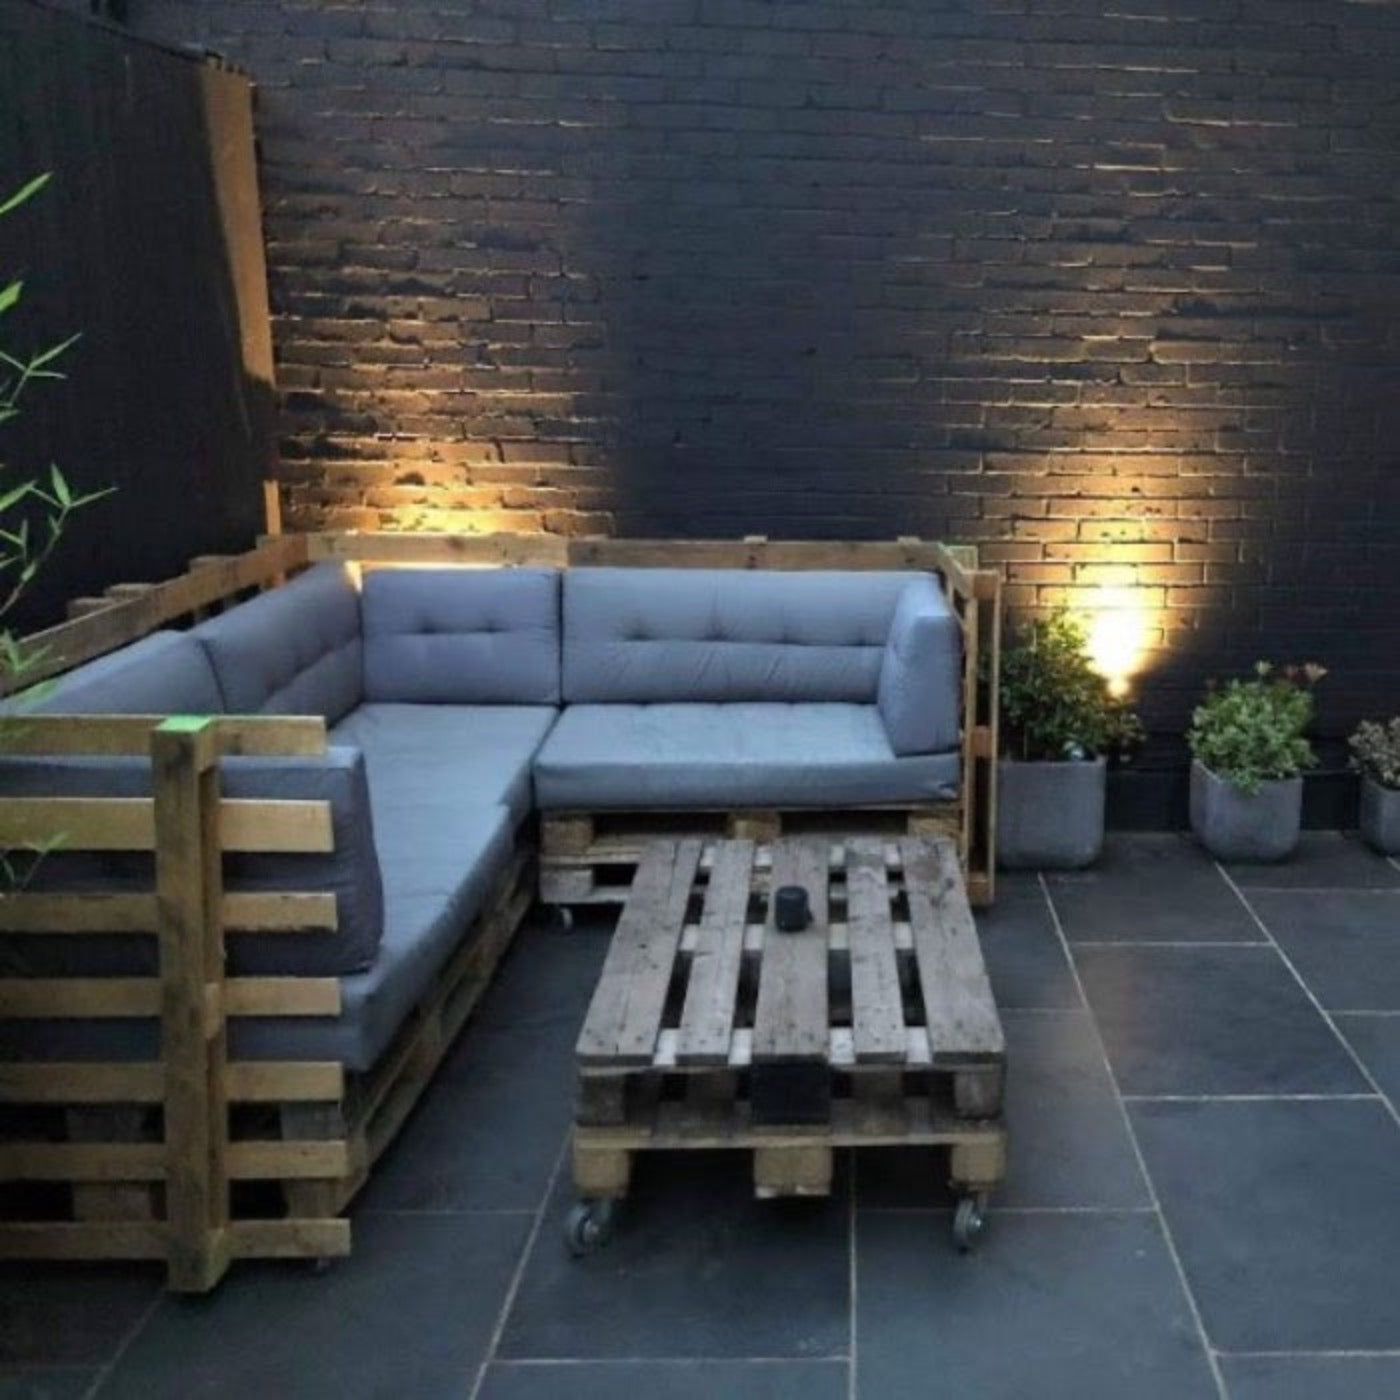 Black Slate Paving Slabs | 600 x 400 x 20 mm | As low as £30.75/m2 | Delivered